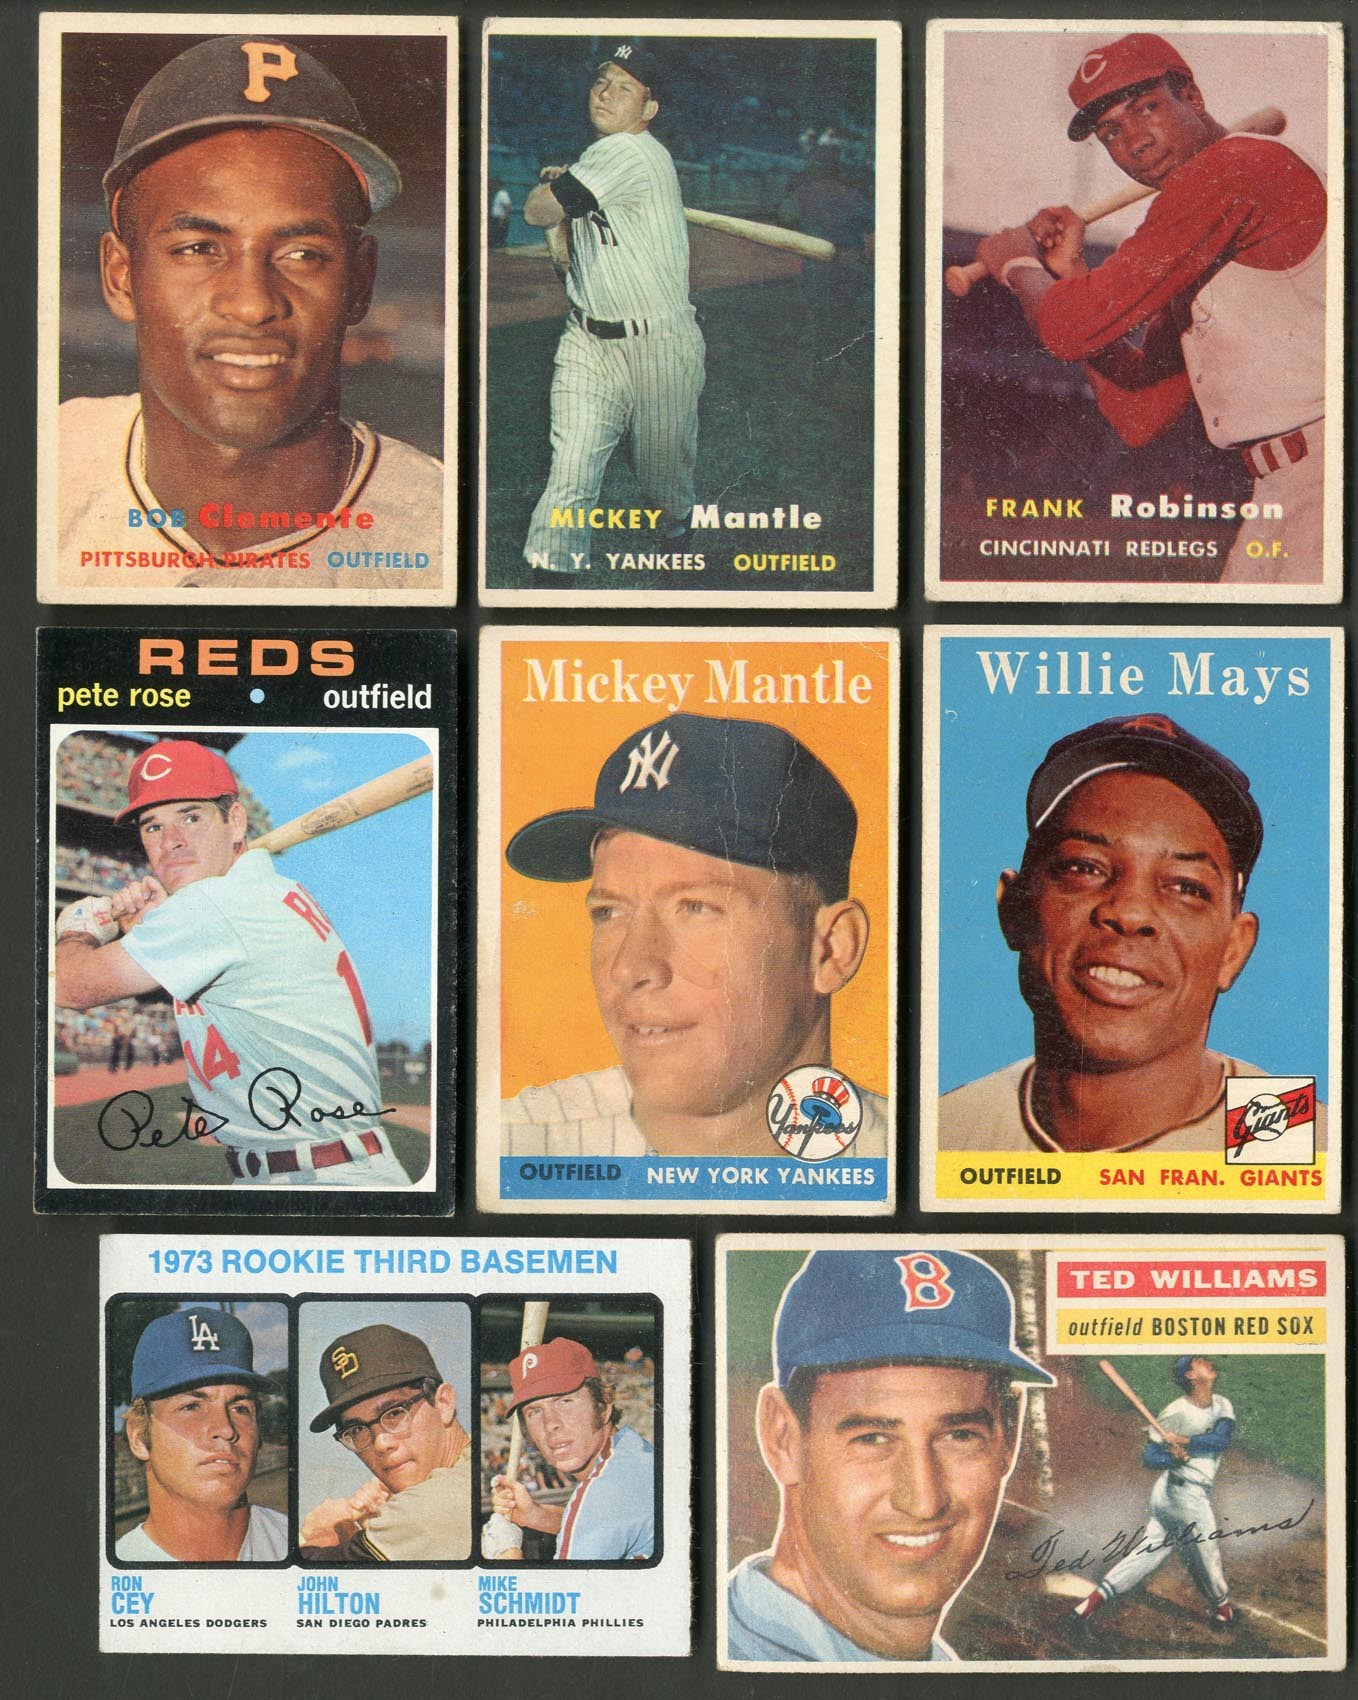 1950s-60s Topps & Bowman Collection with Major Stars - Mantle, Clemente, Mays, Aaron, Koufax (200+)